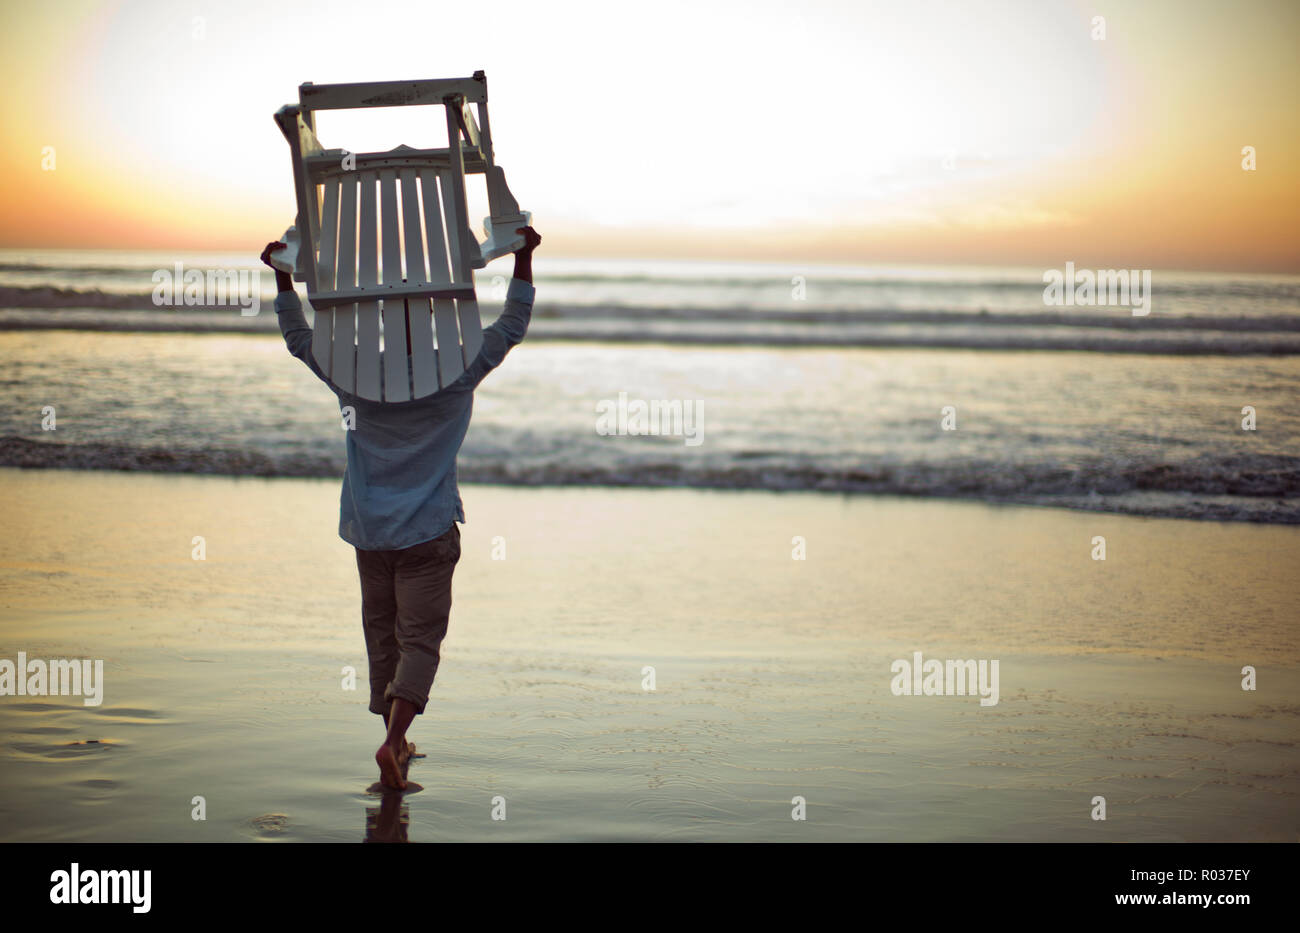 Middle aged man carrying a chair on a beach at sunset. Stock Photo